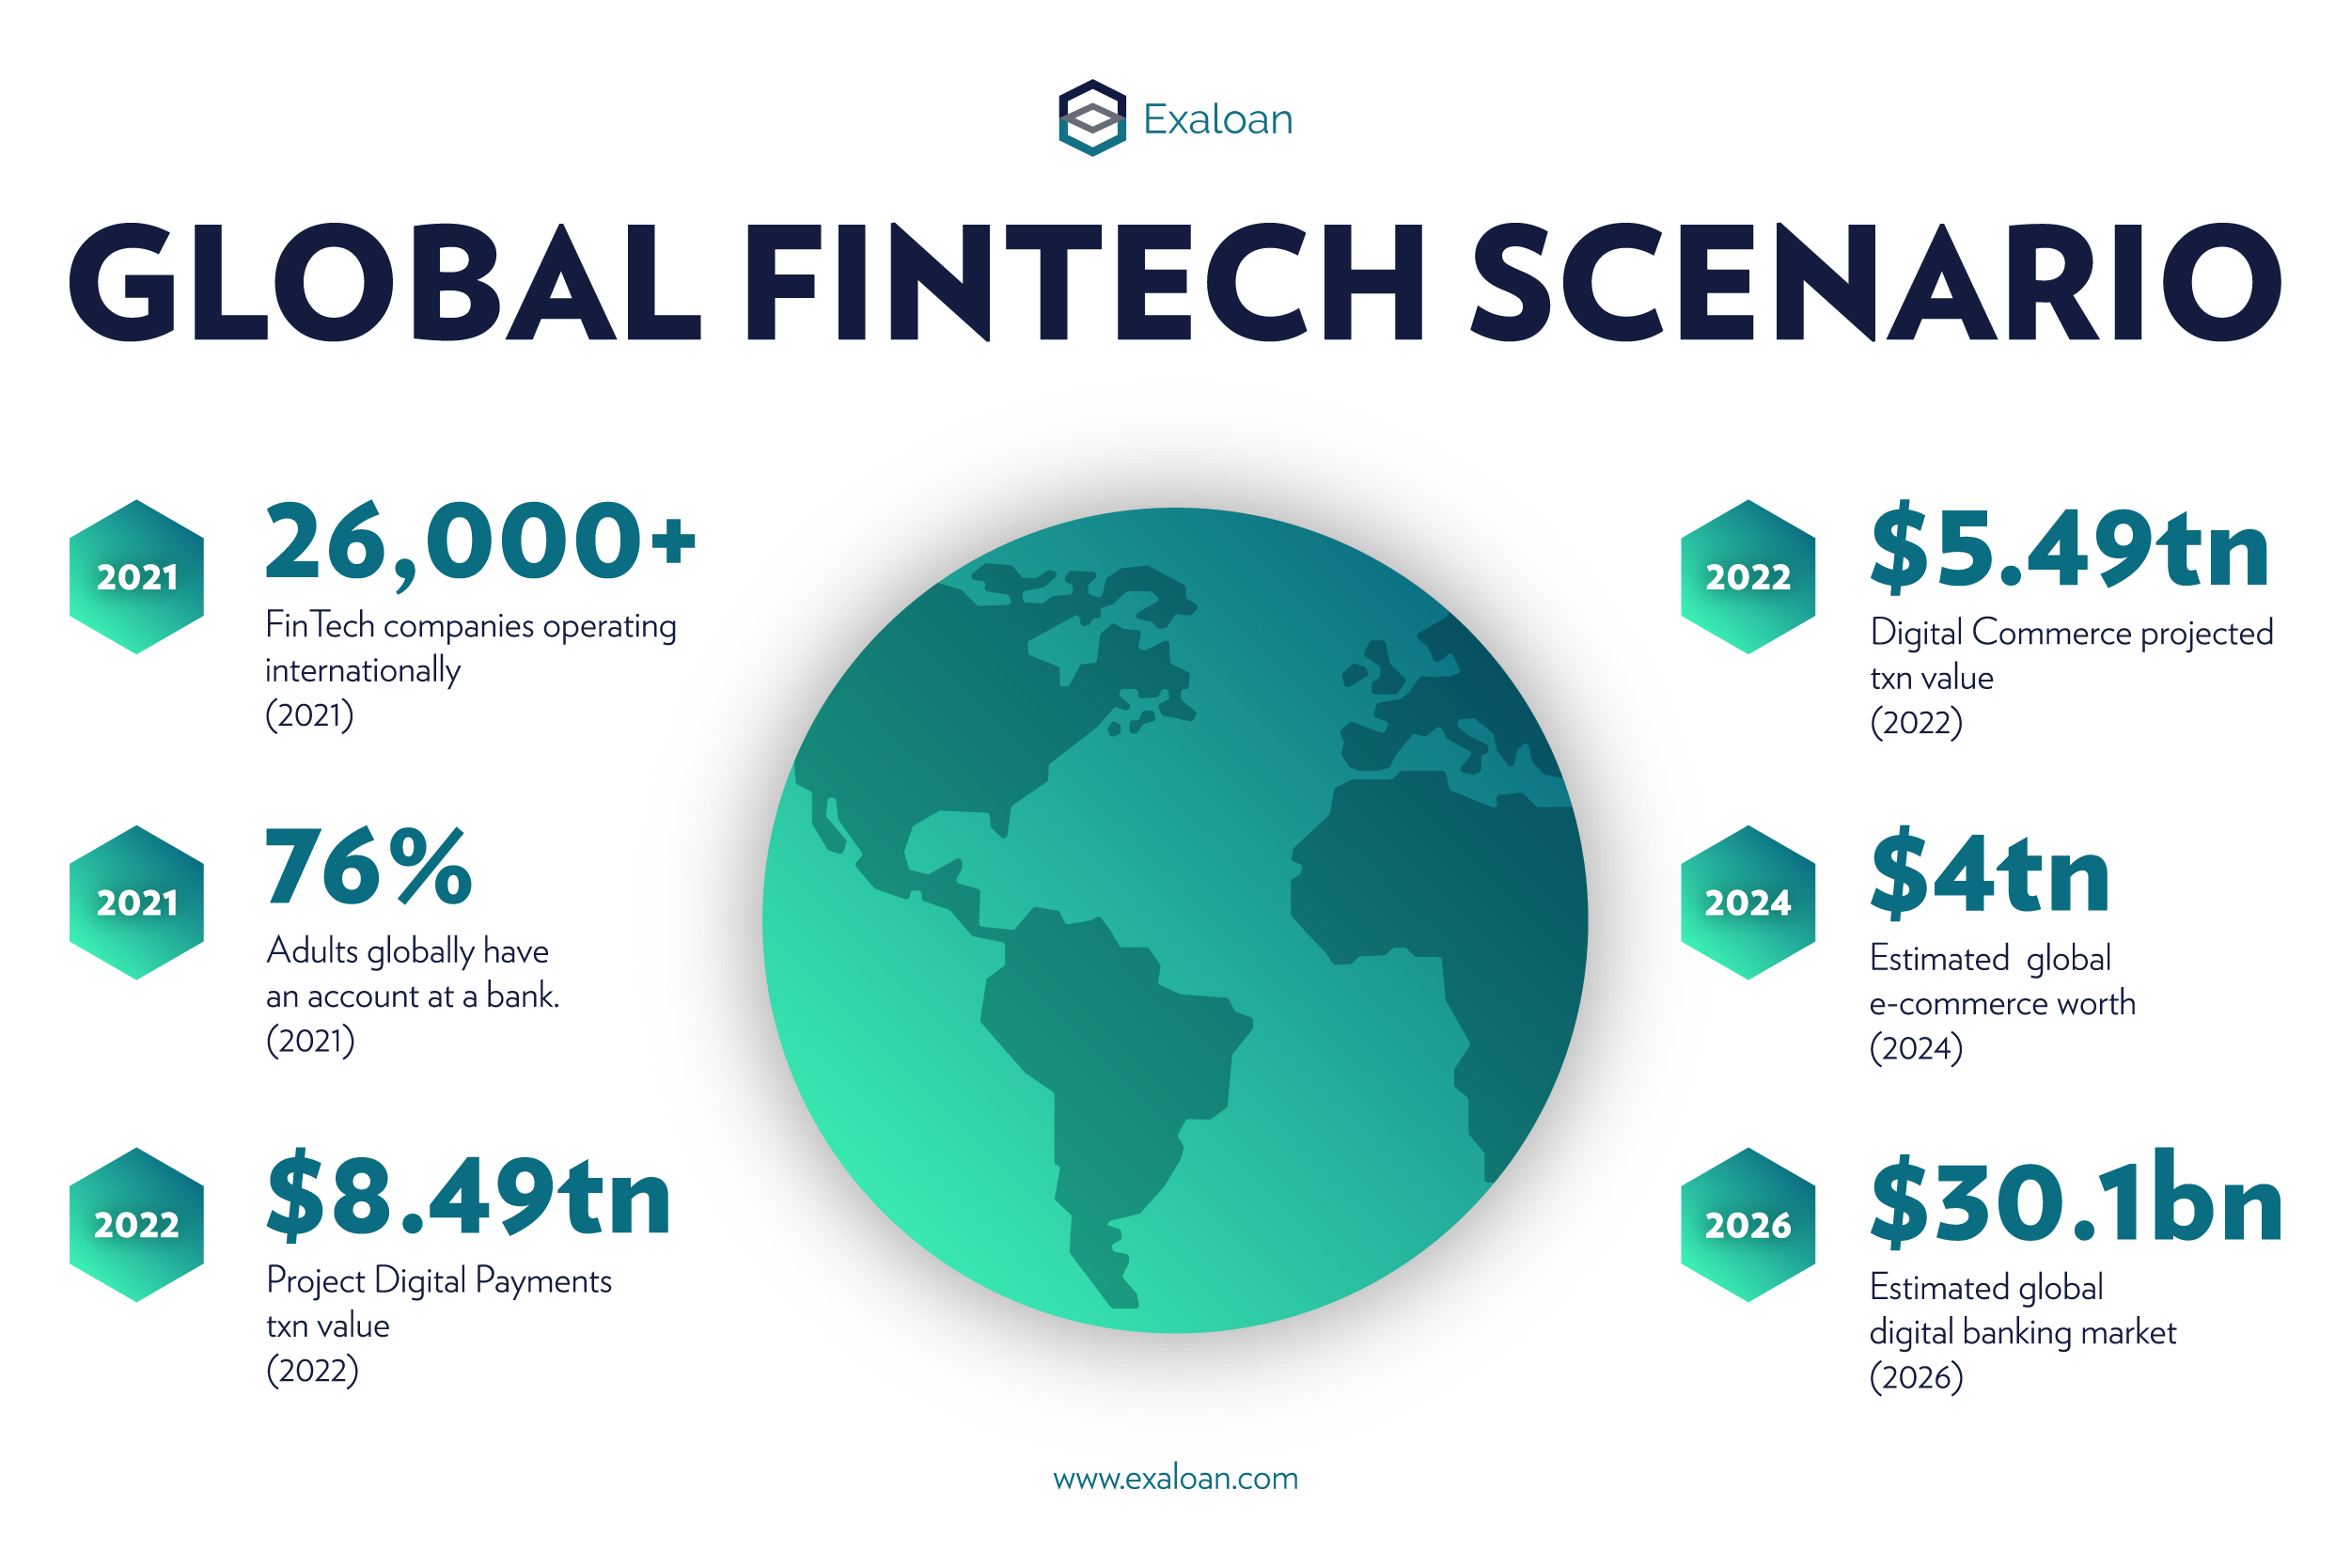 An image shows the global fintech scenario and how Fintech startups impact on digital lending for SMEs